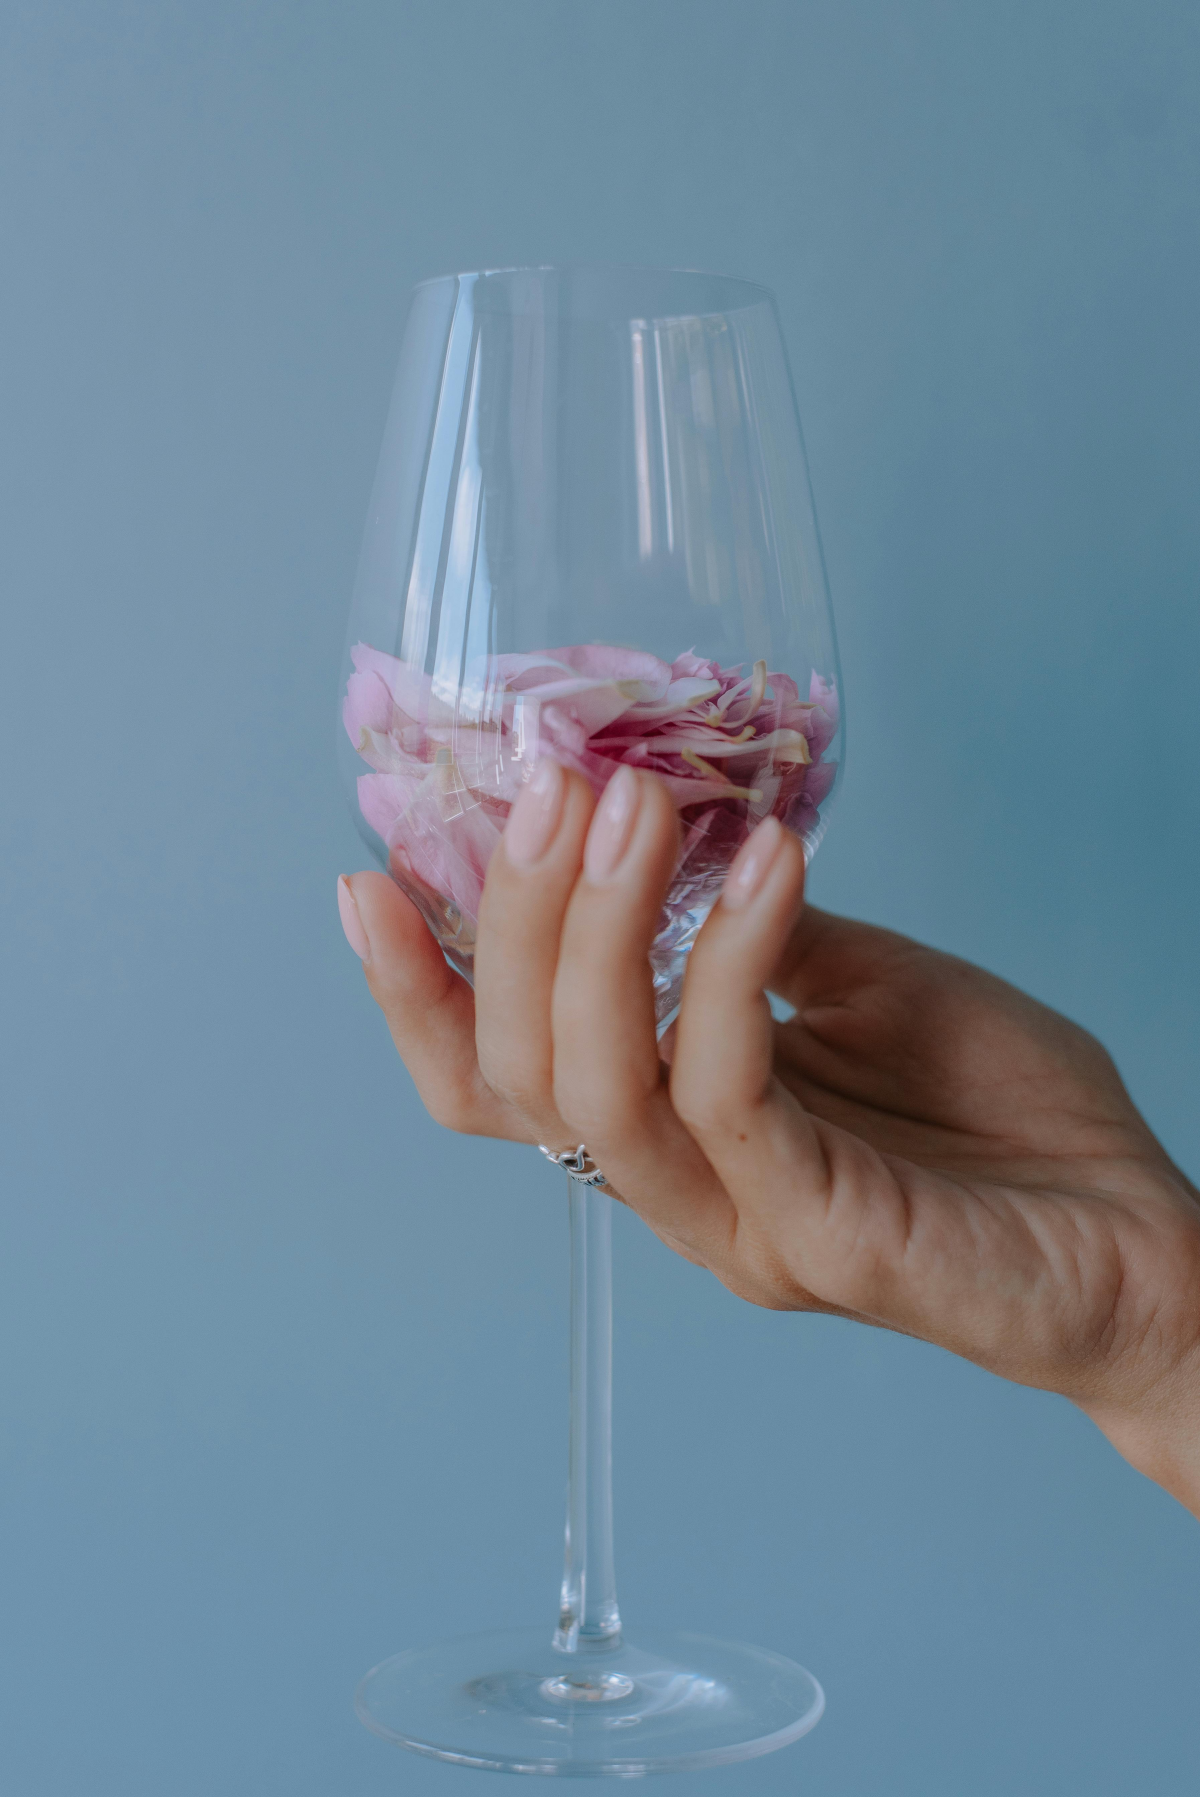 how to dry rose petals glass full of rose petals